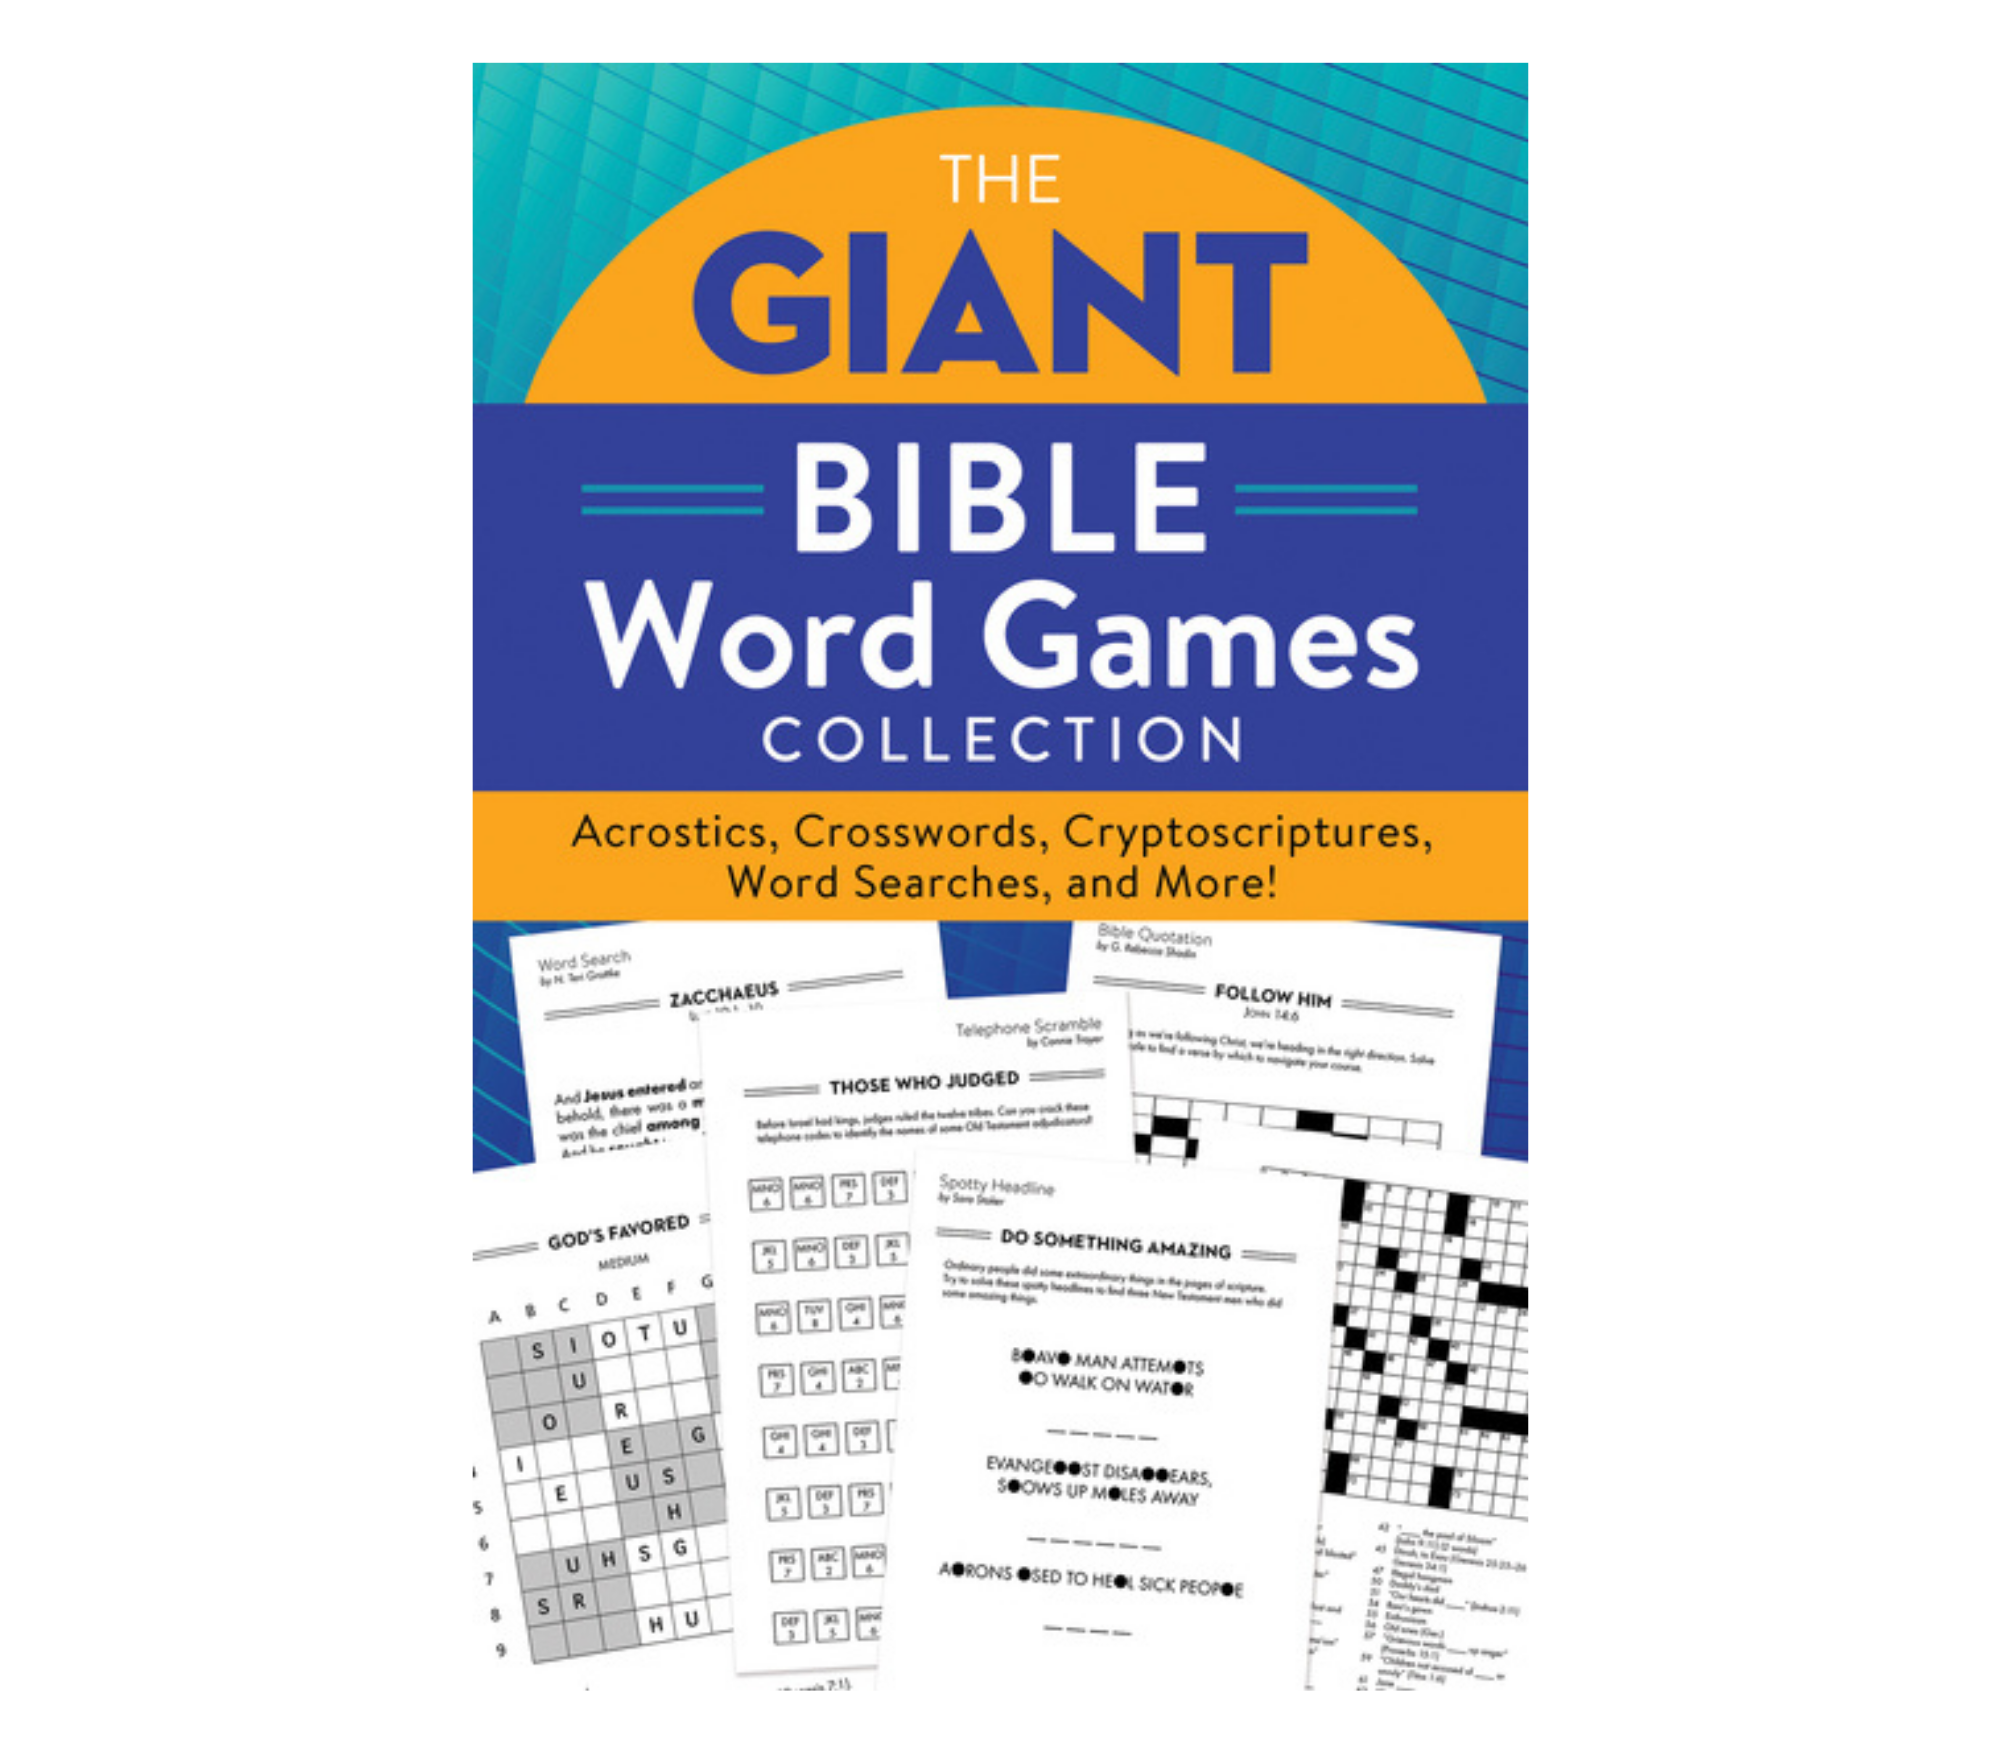 The Giant Bible Word Games Collection